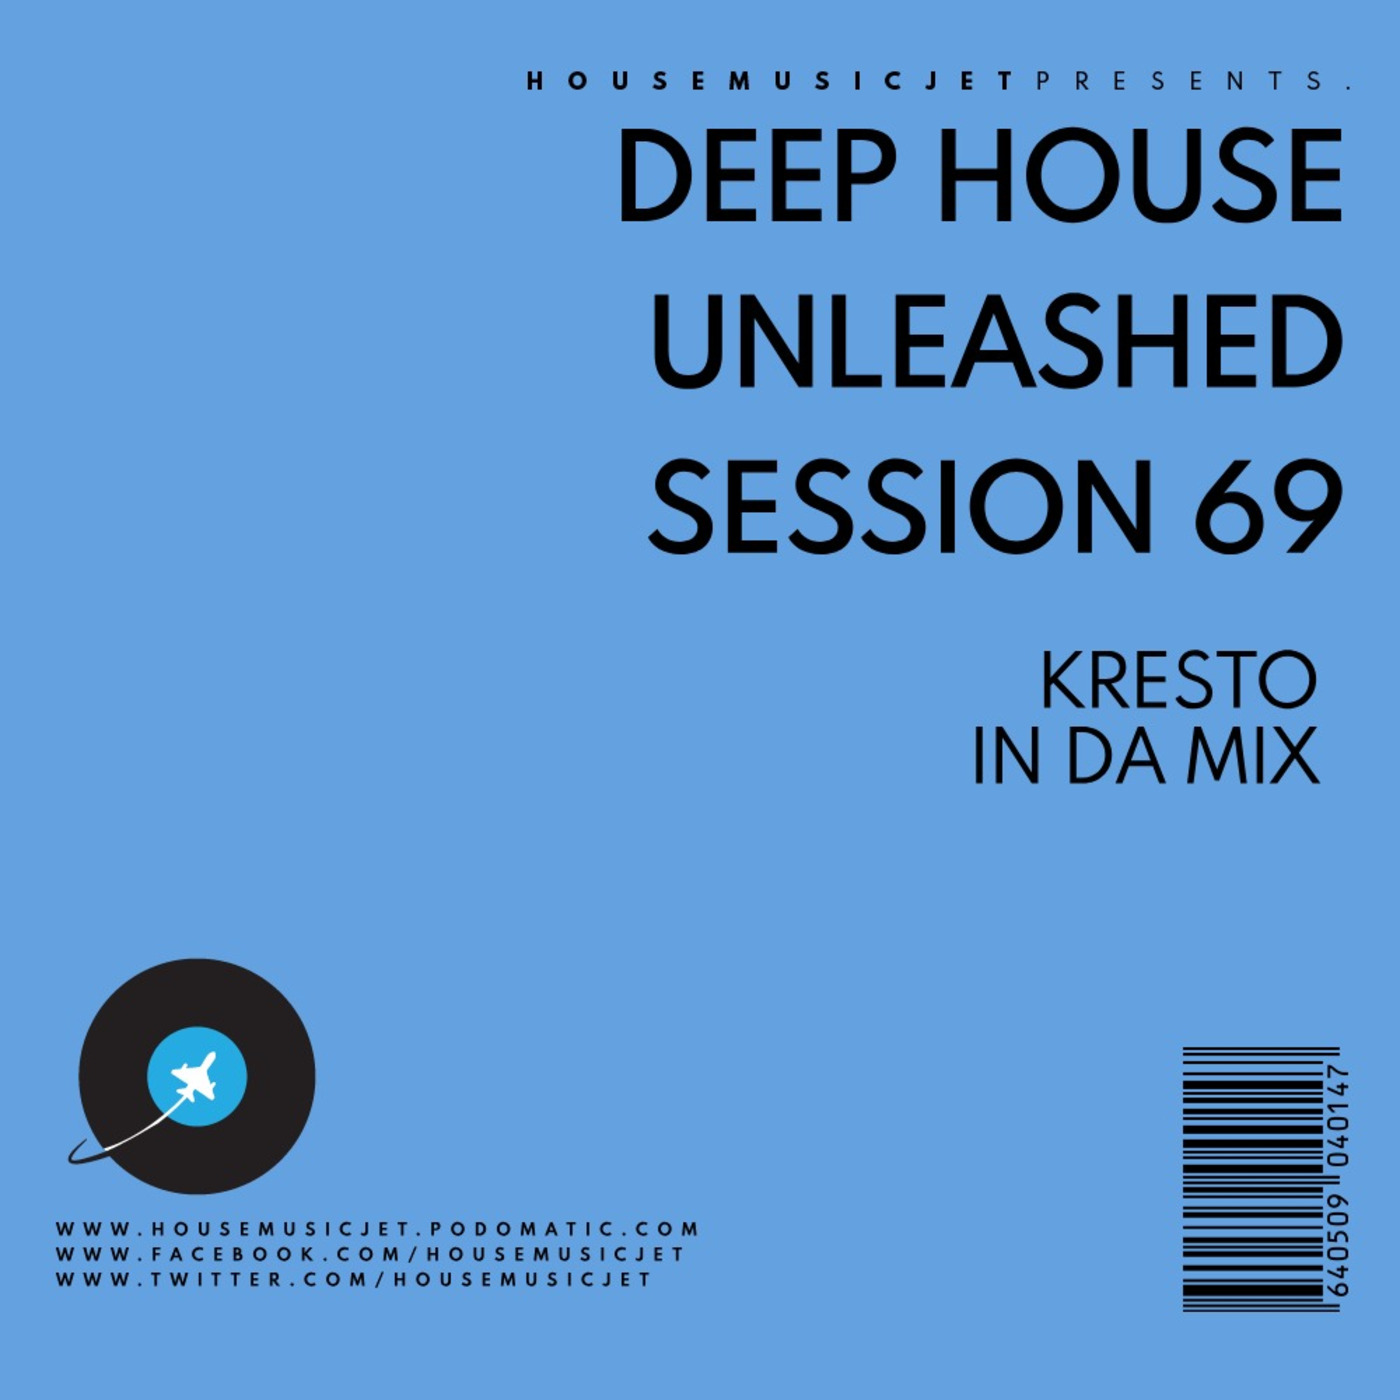 Kresto In Da Mix - Deep House Unleashed Session 69